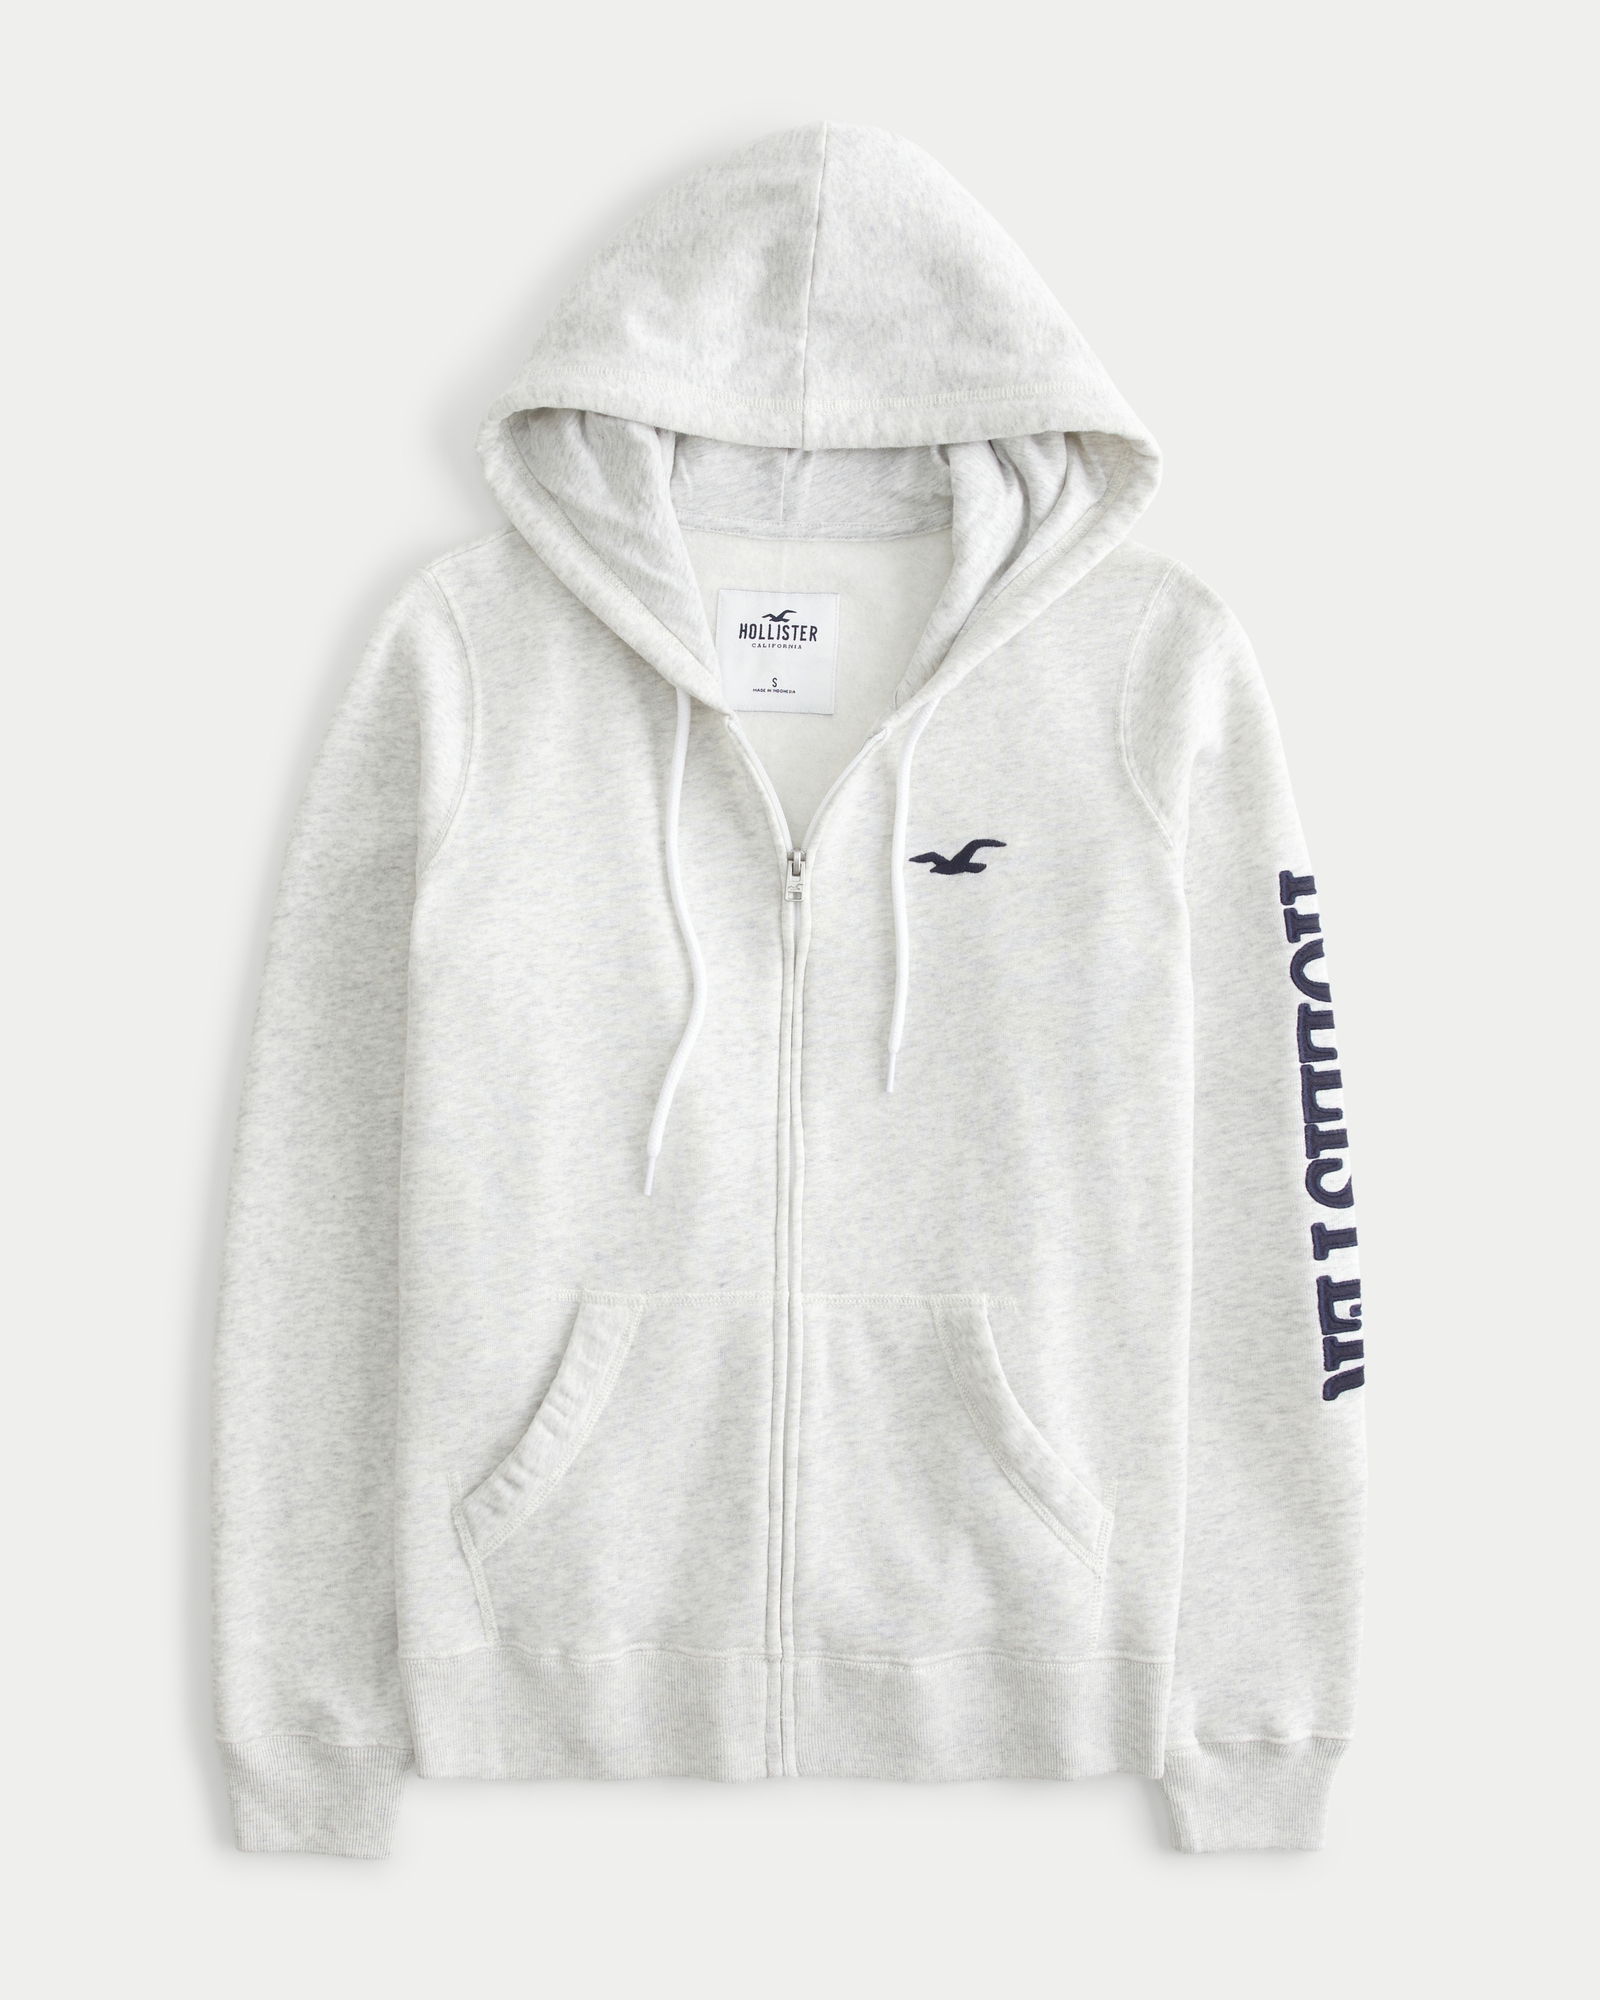 White and blue, Hollister zip up sweater.